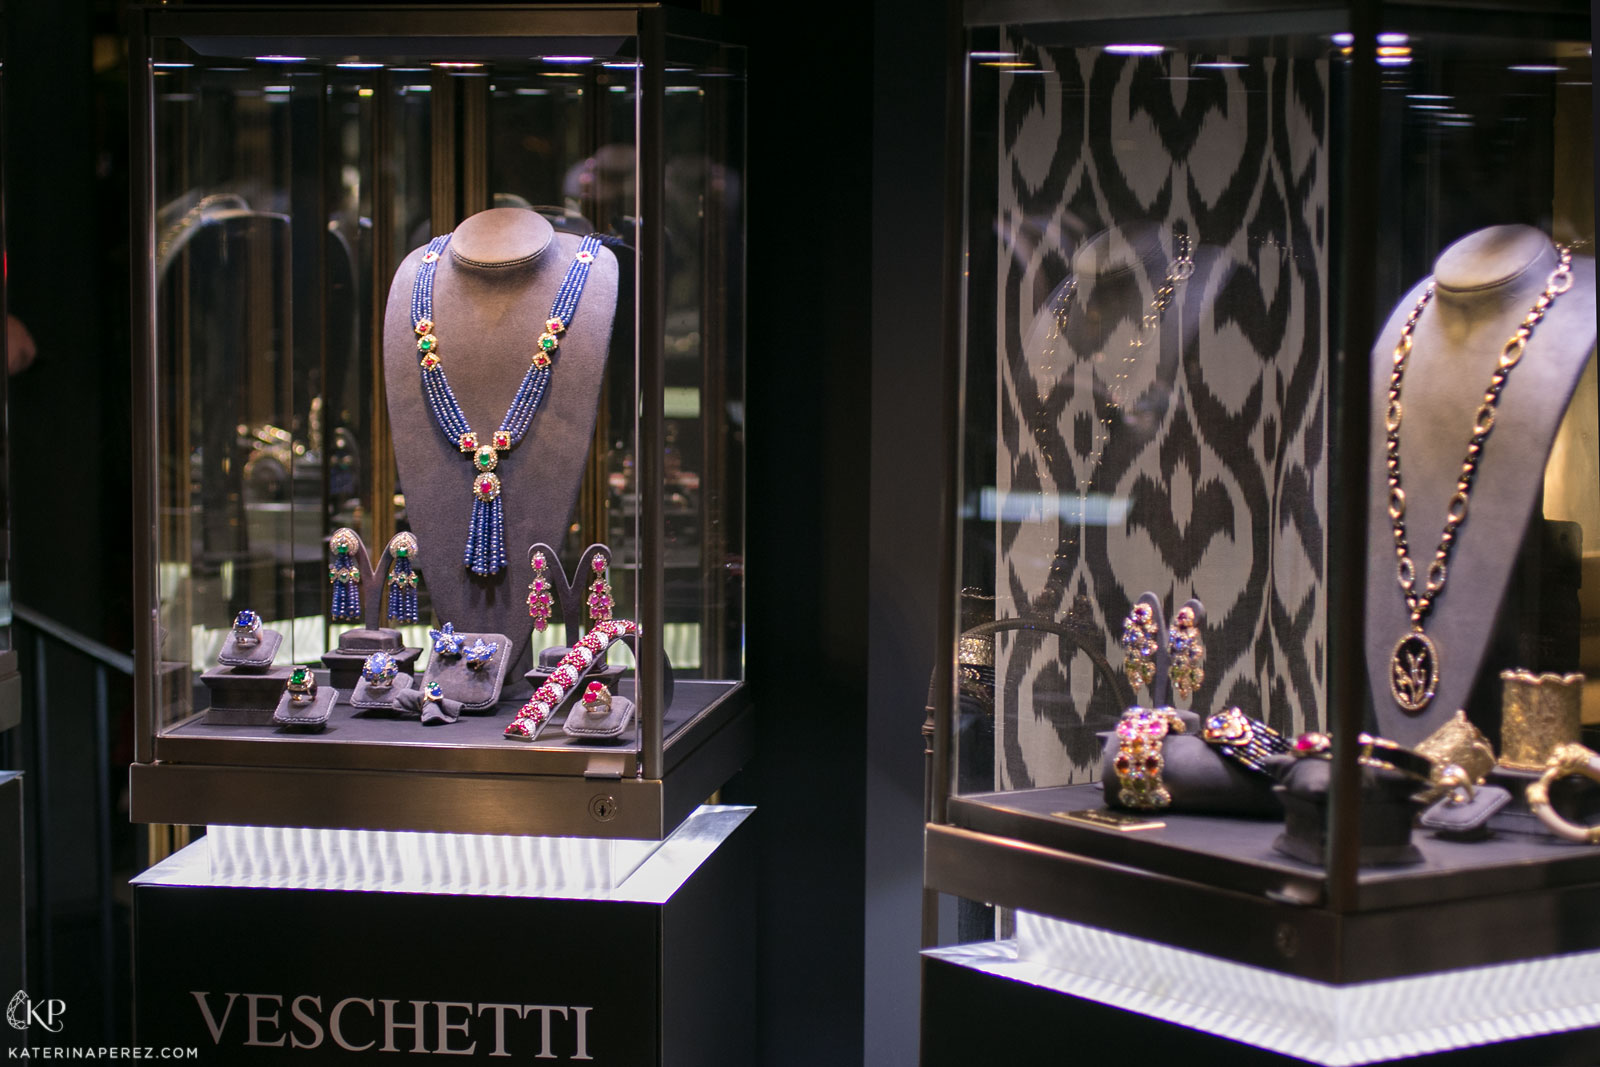 A selection of Veschetti jewellery at the private exhibition